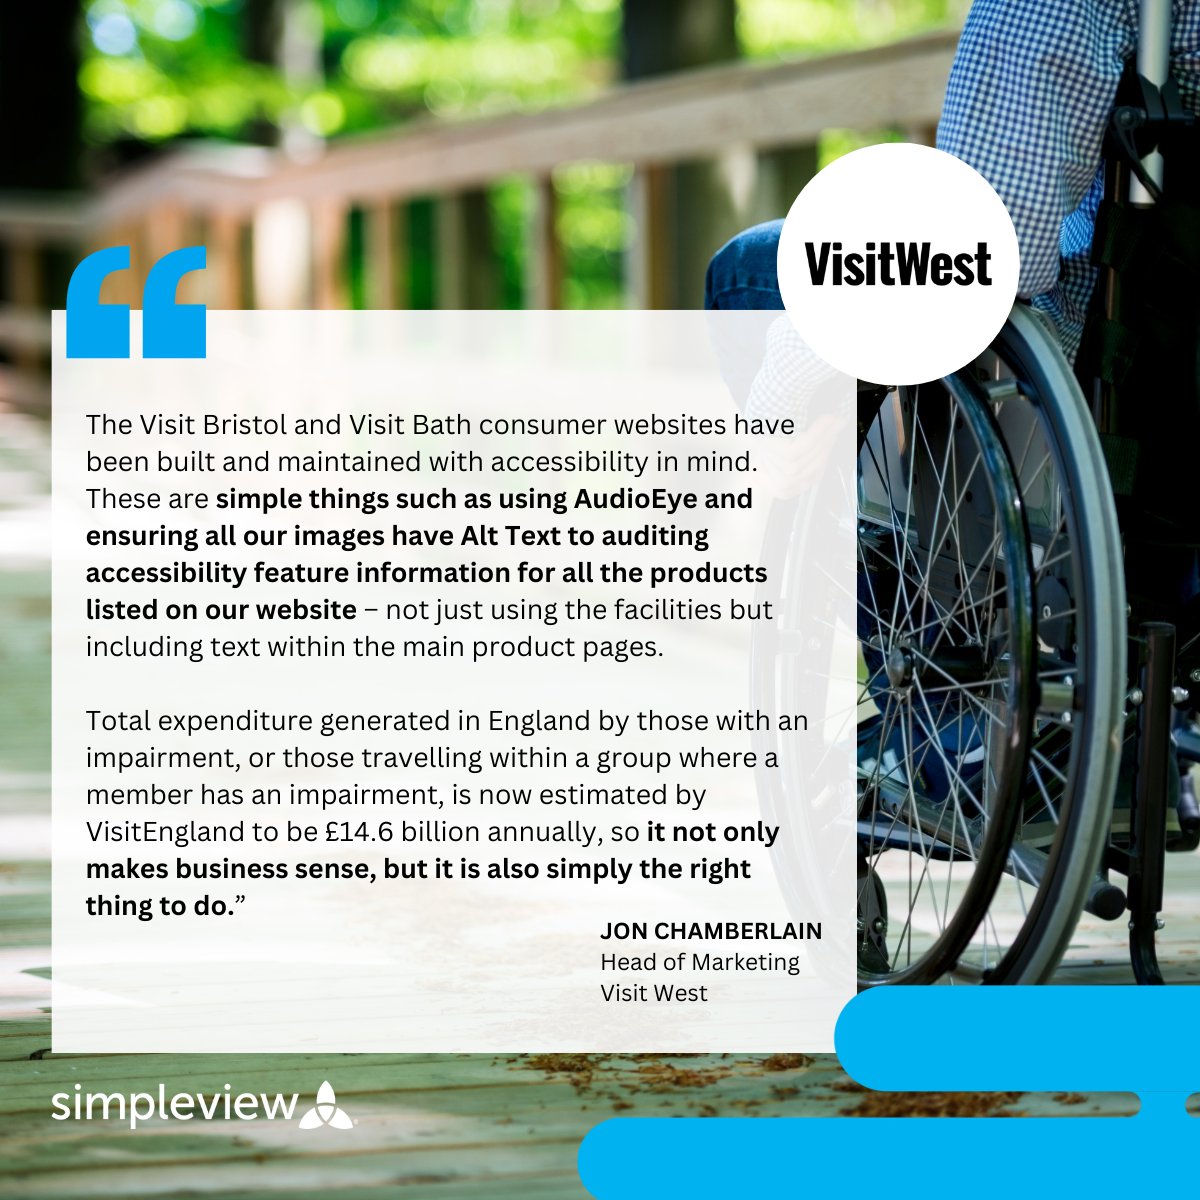 @VisitEngland estimates that the total expenditure of those travelling with a disability is now £14.6billion annually. 

@VisitWestUK is making travel inclusive for all with its @audioeyeinc-supported websites for @VisitBristol and @VisitBath.

#accessibletravel #tourism #travel